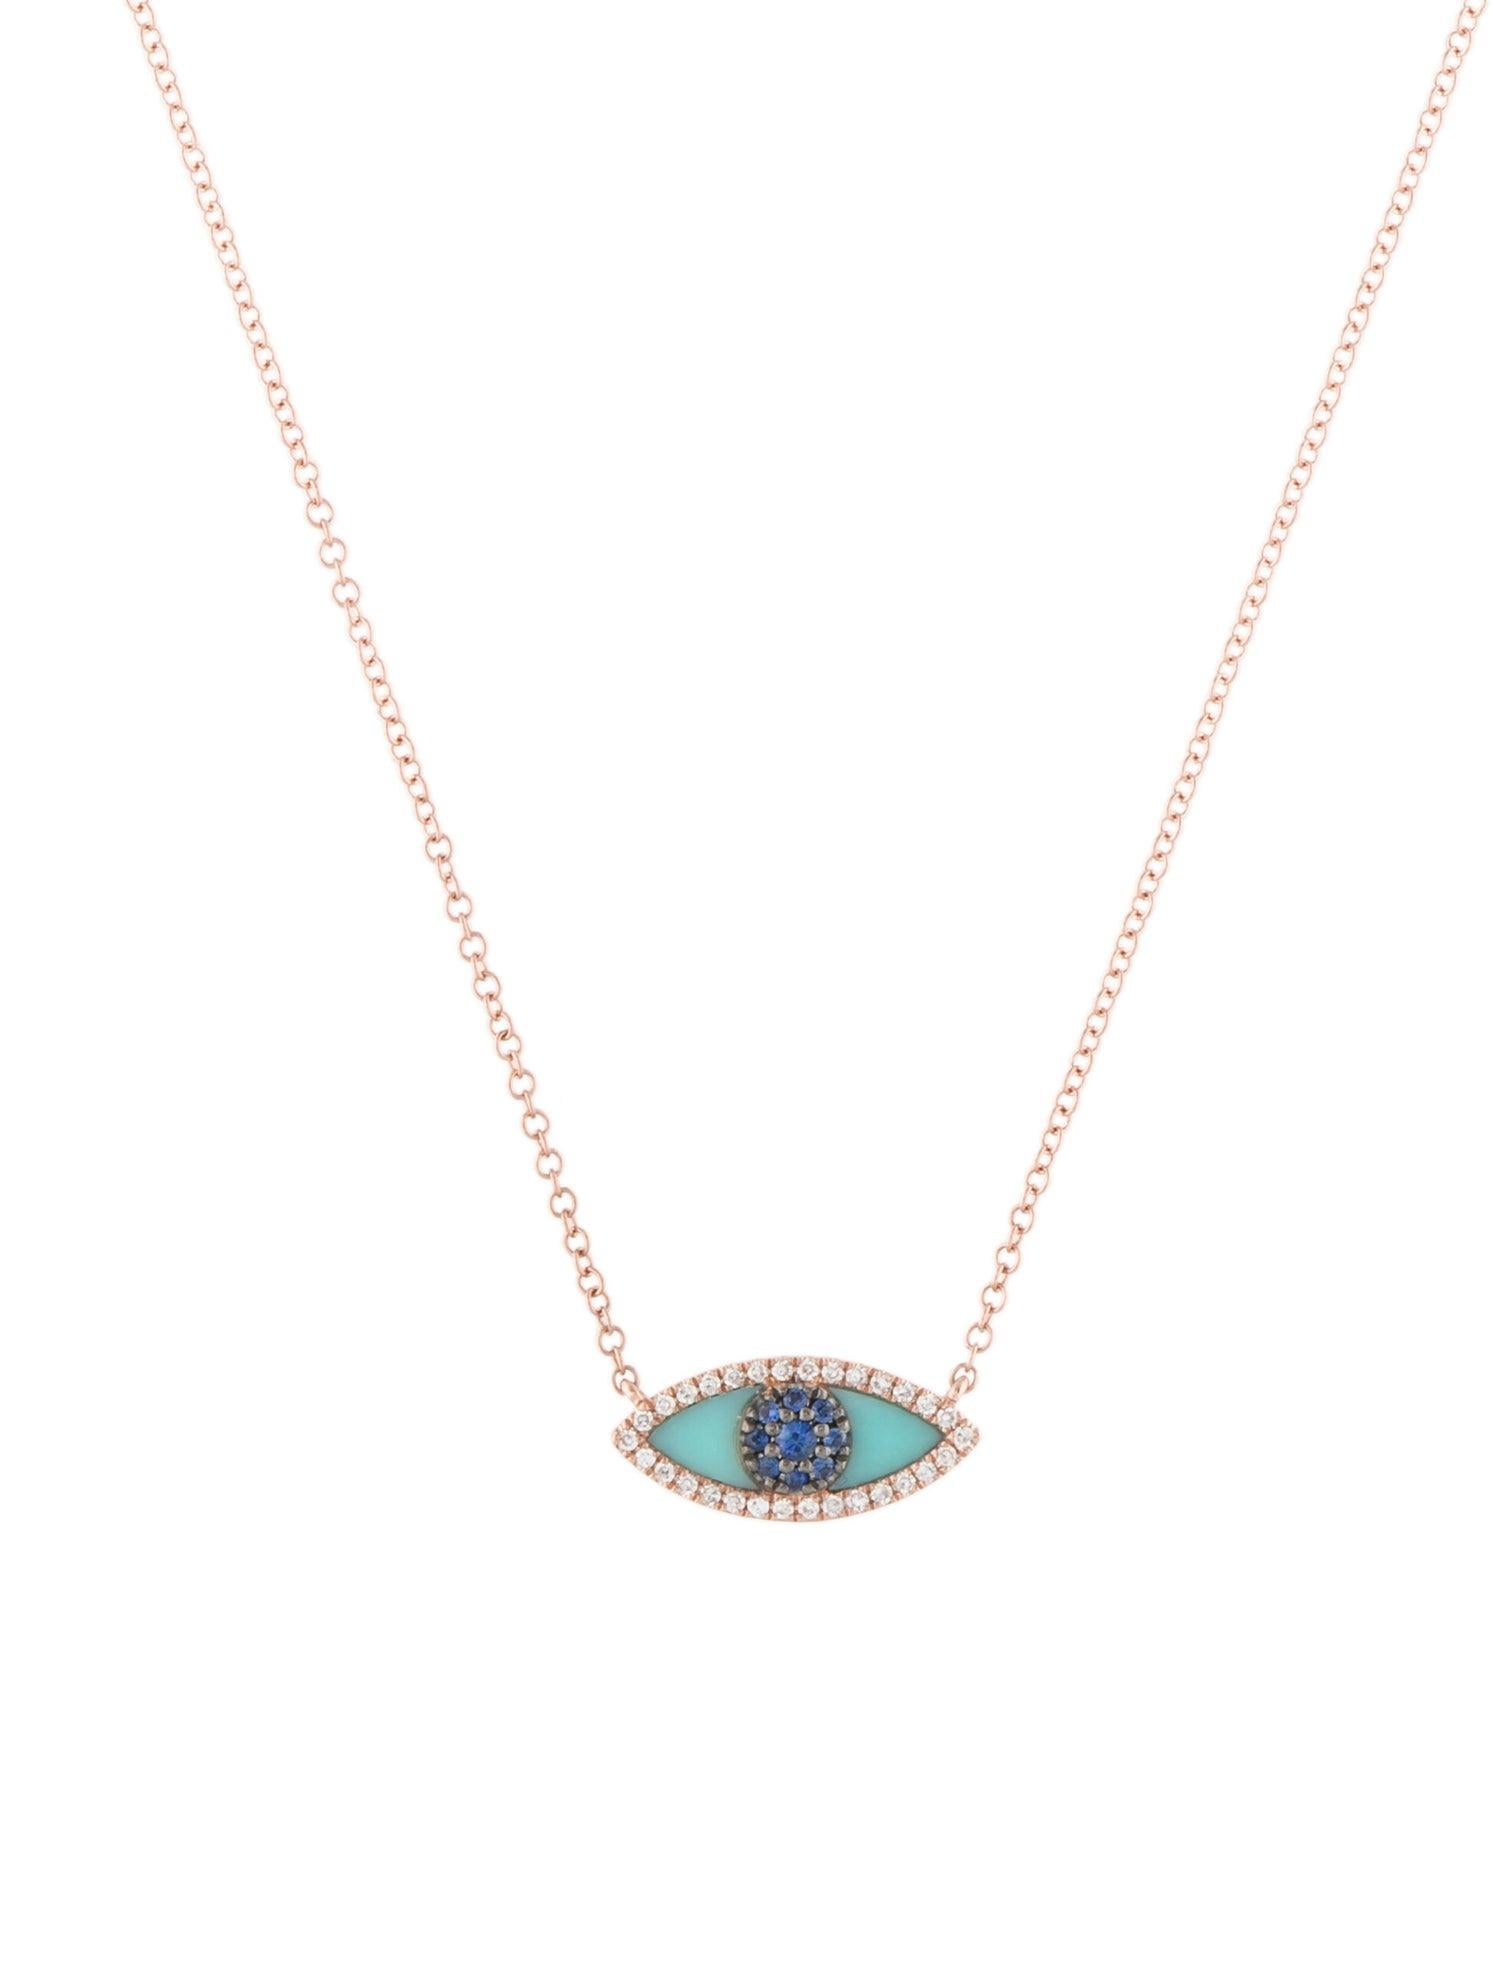 Round Cut 14K Yellow Gold 0.08 Carat Diamond Sapphire & Turquoise Evil Eye Necklace For Sale